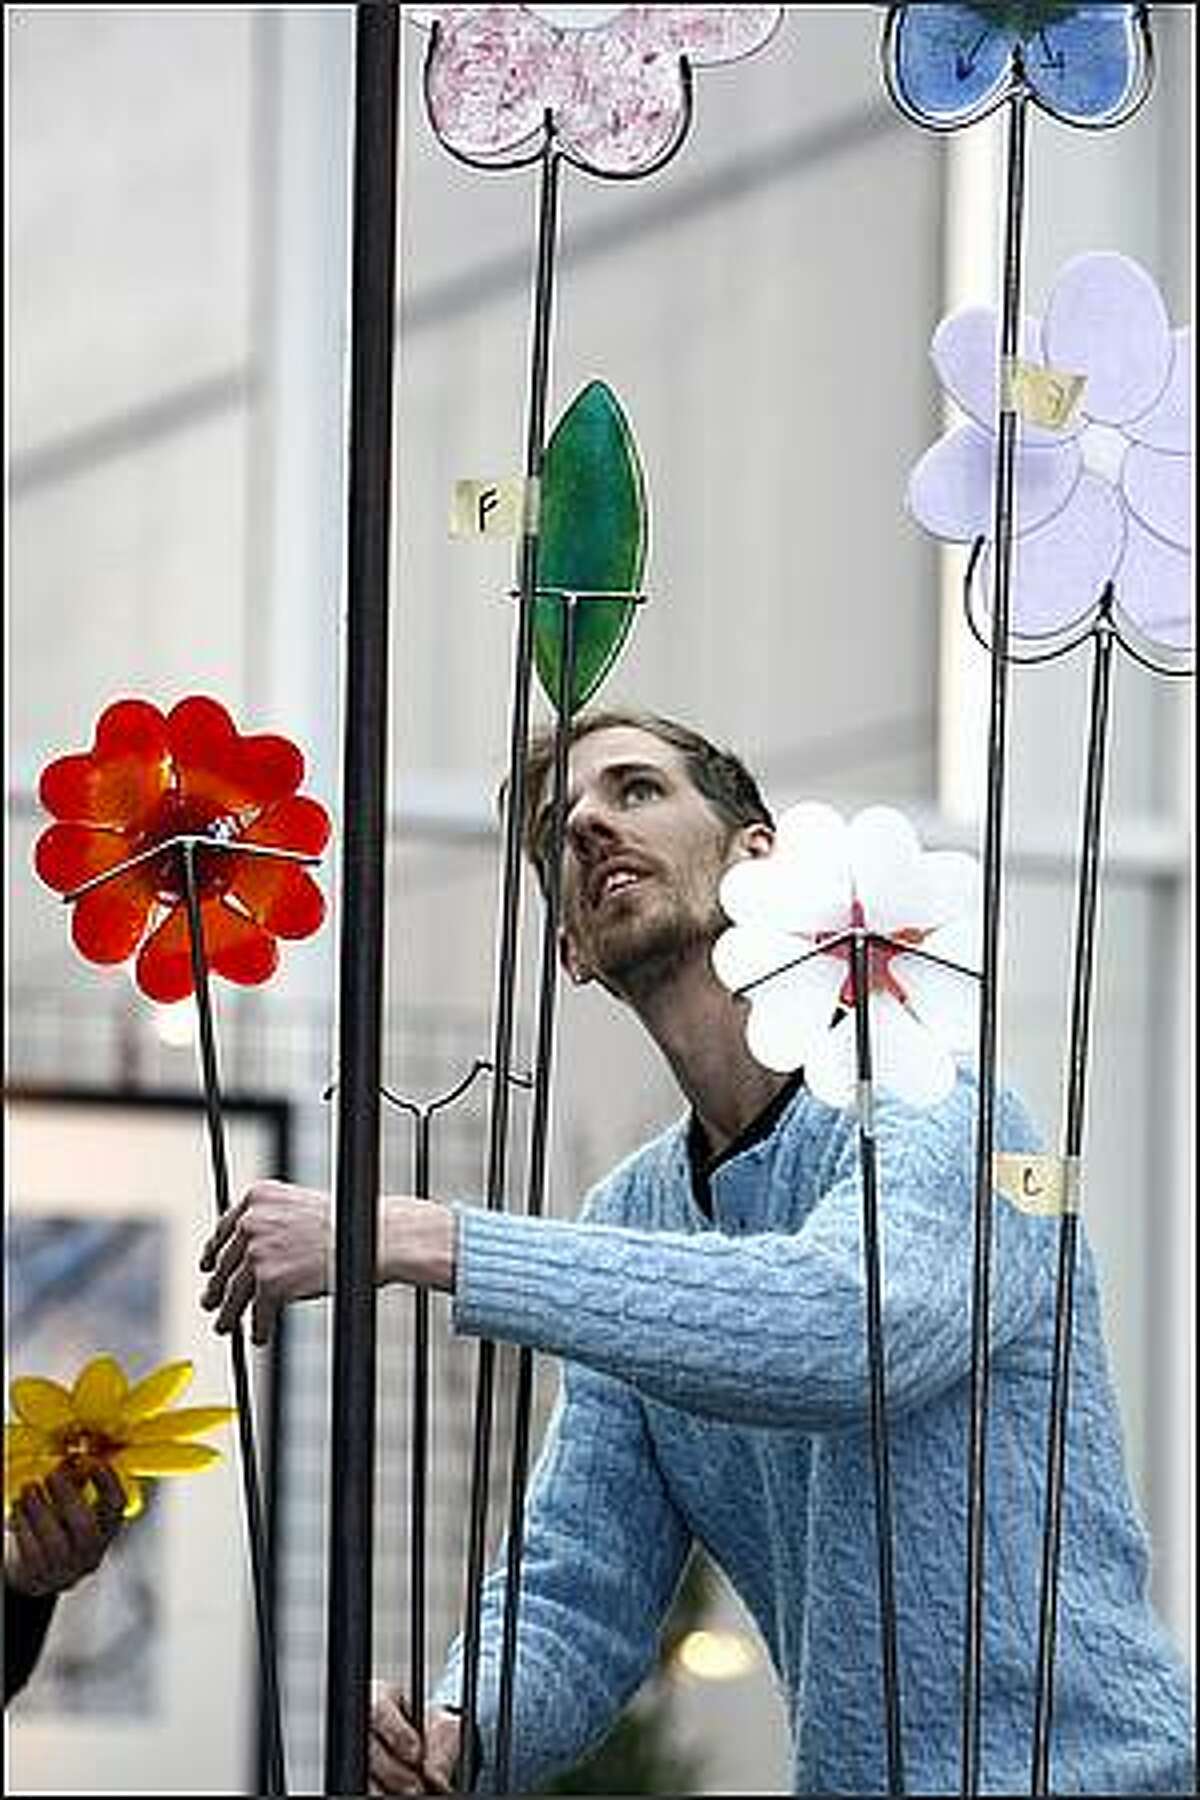 Greg Baker, of Bedrock Industries, sets up their "Bee Here Now" display in the skybridge of the Washington State Convention and Trade Center for The Northwest Flower & Garden Show. The garden stake flowers are made of 100 percent recycled glass.